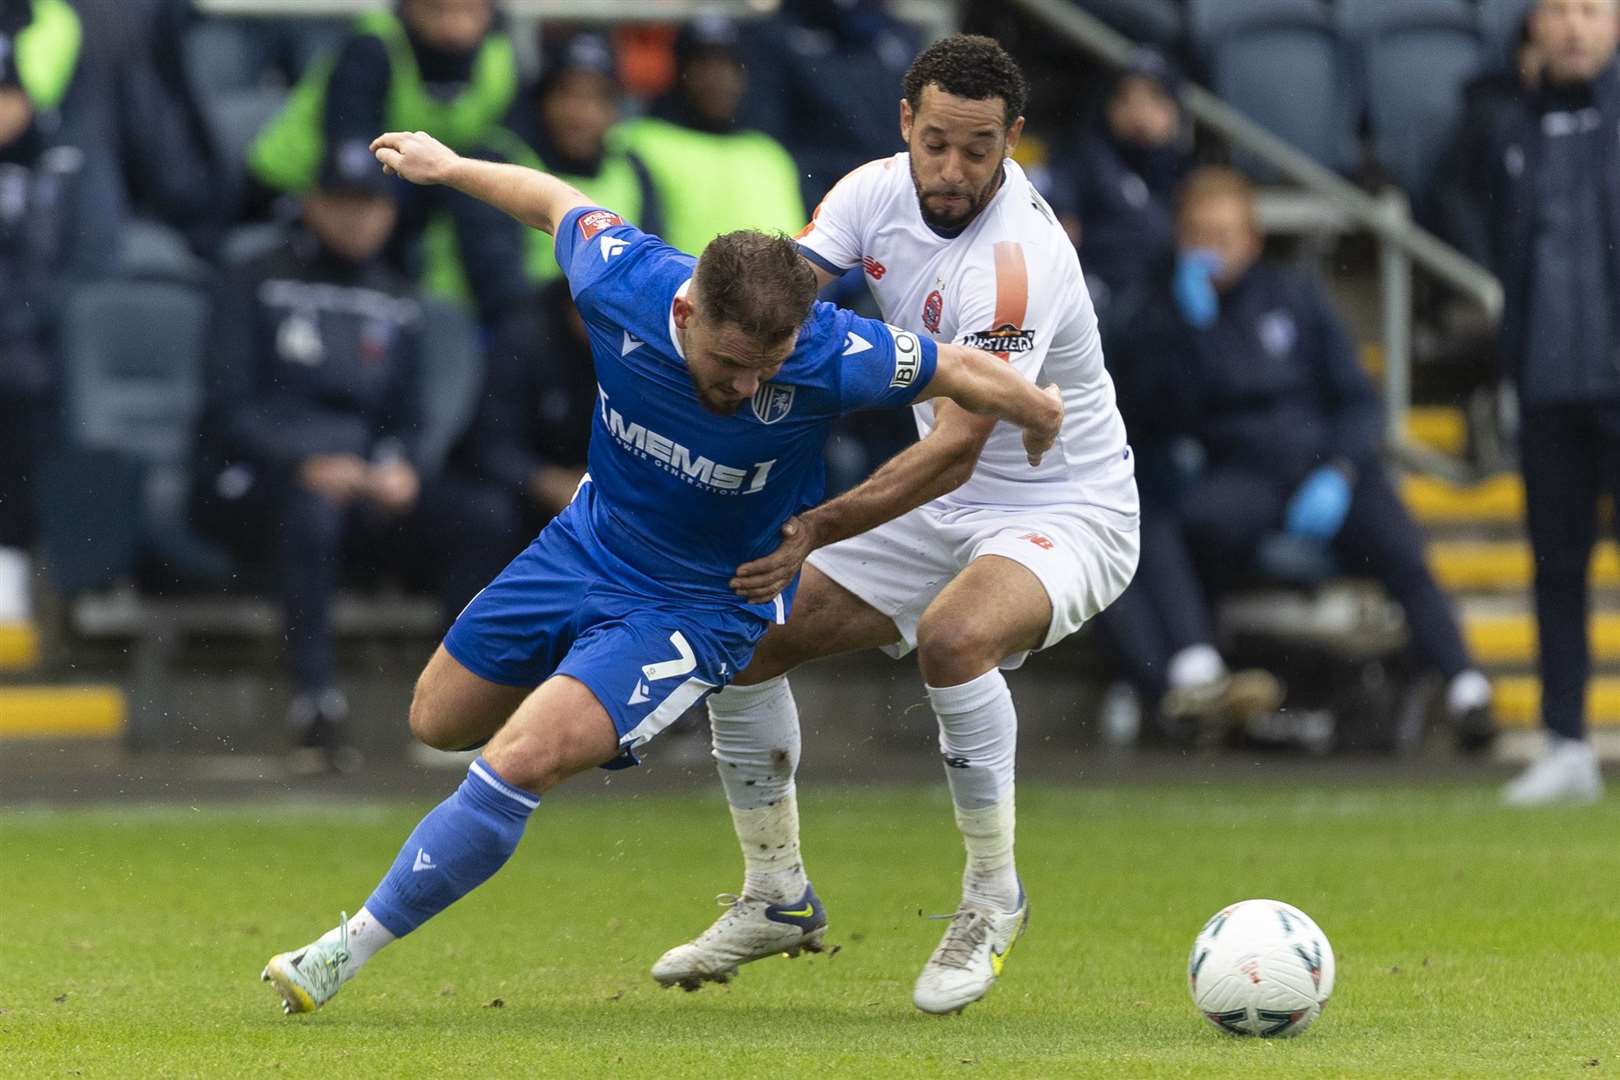 Alex MacDonald has been making an impact for Gillingham off the bench but wants starts